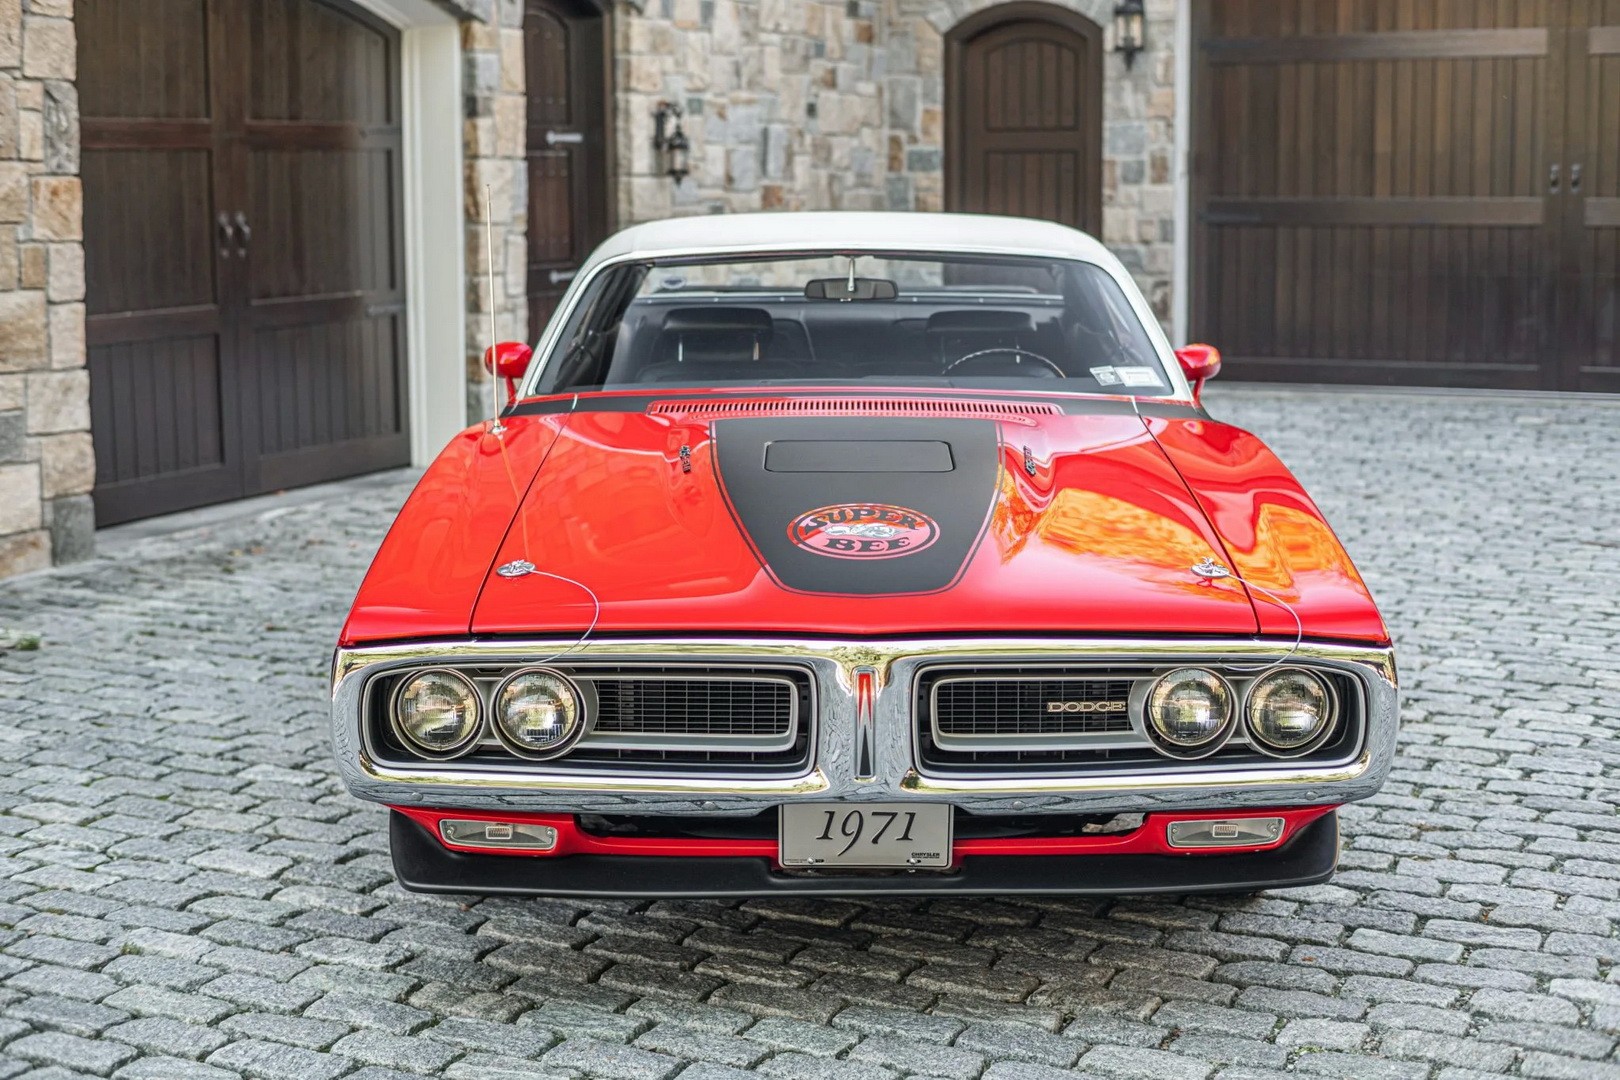 Spectacular 1971 Dodge Charger Super Bee With 426 Hemi and 4-Speed Manual  Seeks New Owner - autoevolution